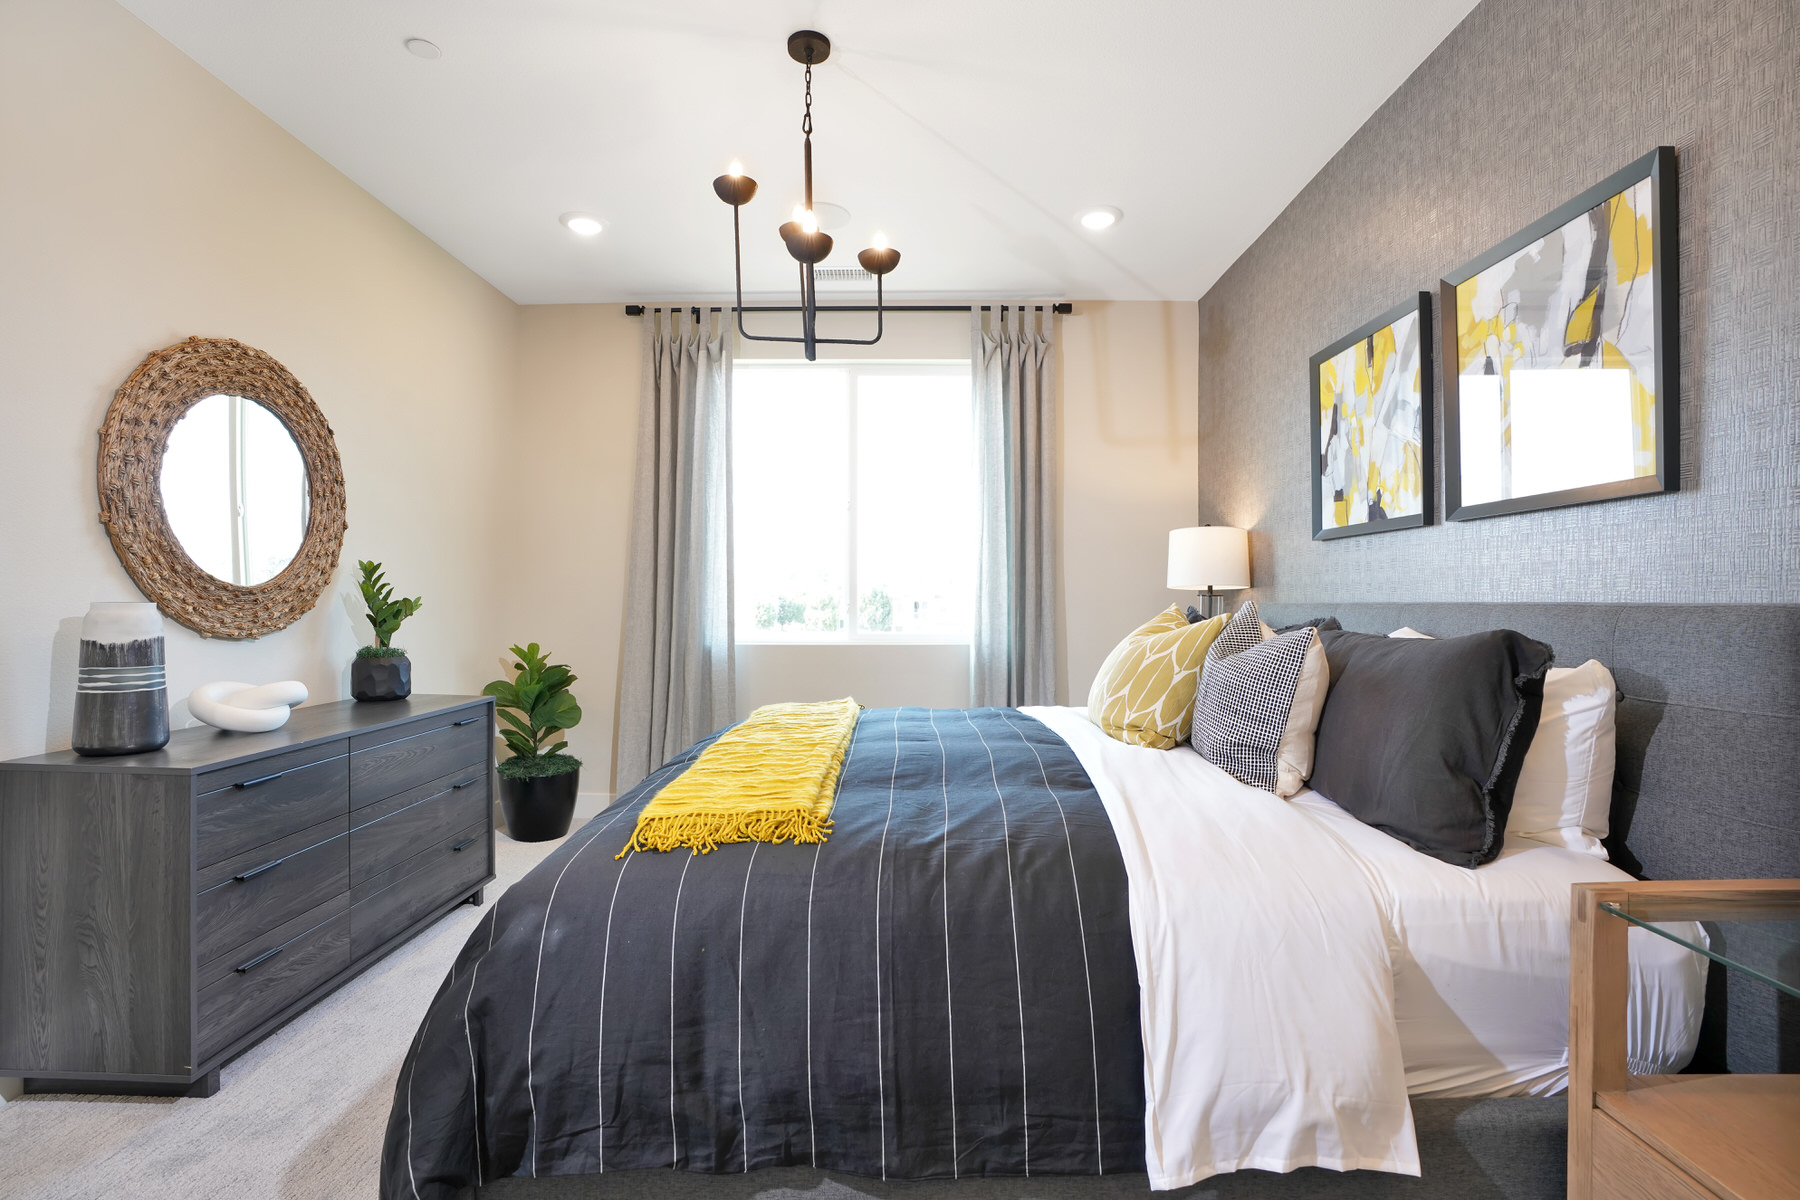 Primary Bedroom in Plan 3A at Townes at Magnolia by Melia Homes in Anaheim, CA